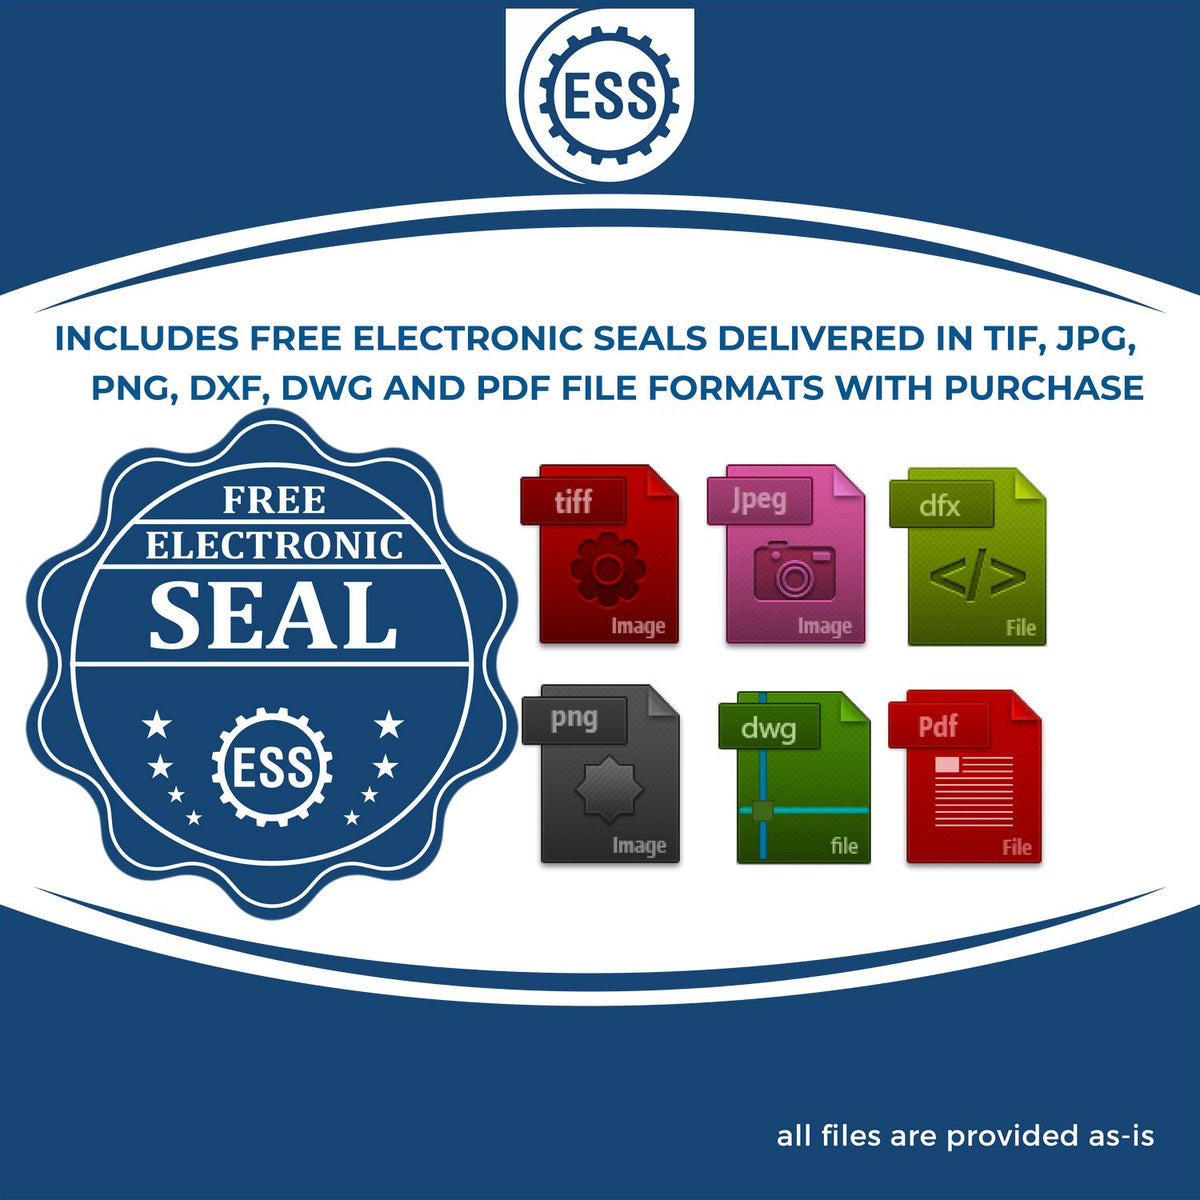 An infographic for the free electronic seal for the Gift New Jersey Land Surveyor Seal illustrating the different file type icons such as DXF, DWG, TIF, JPG and PNG.